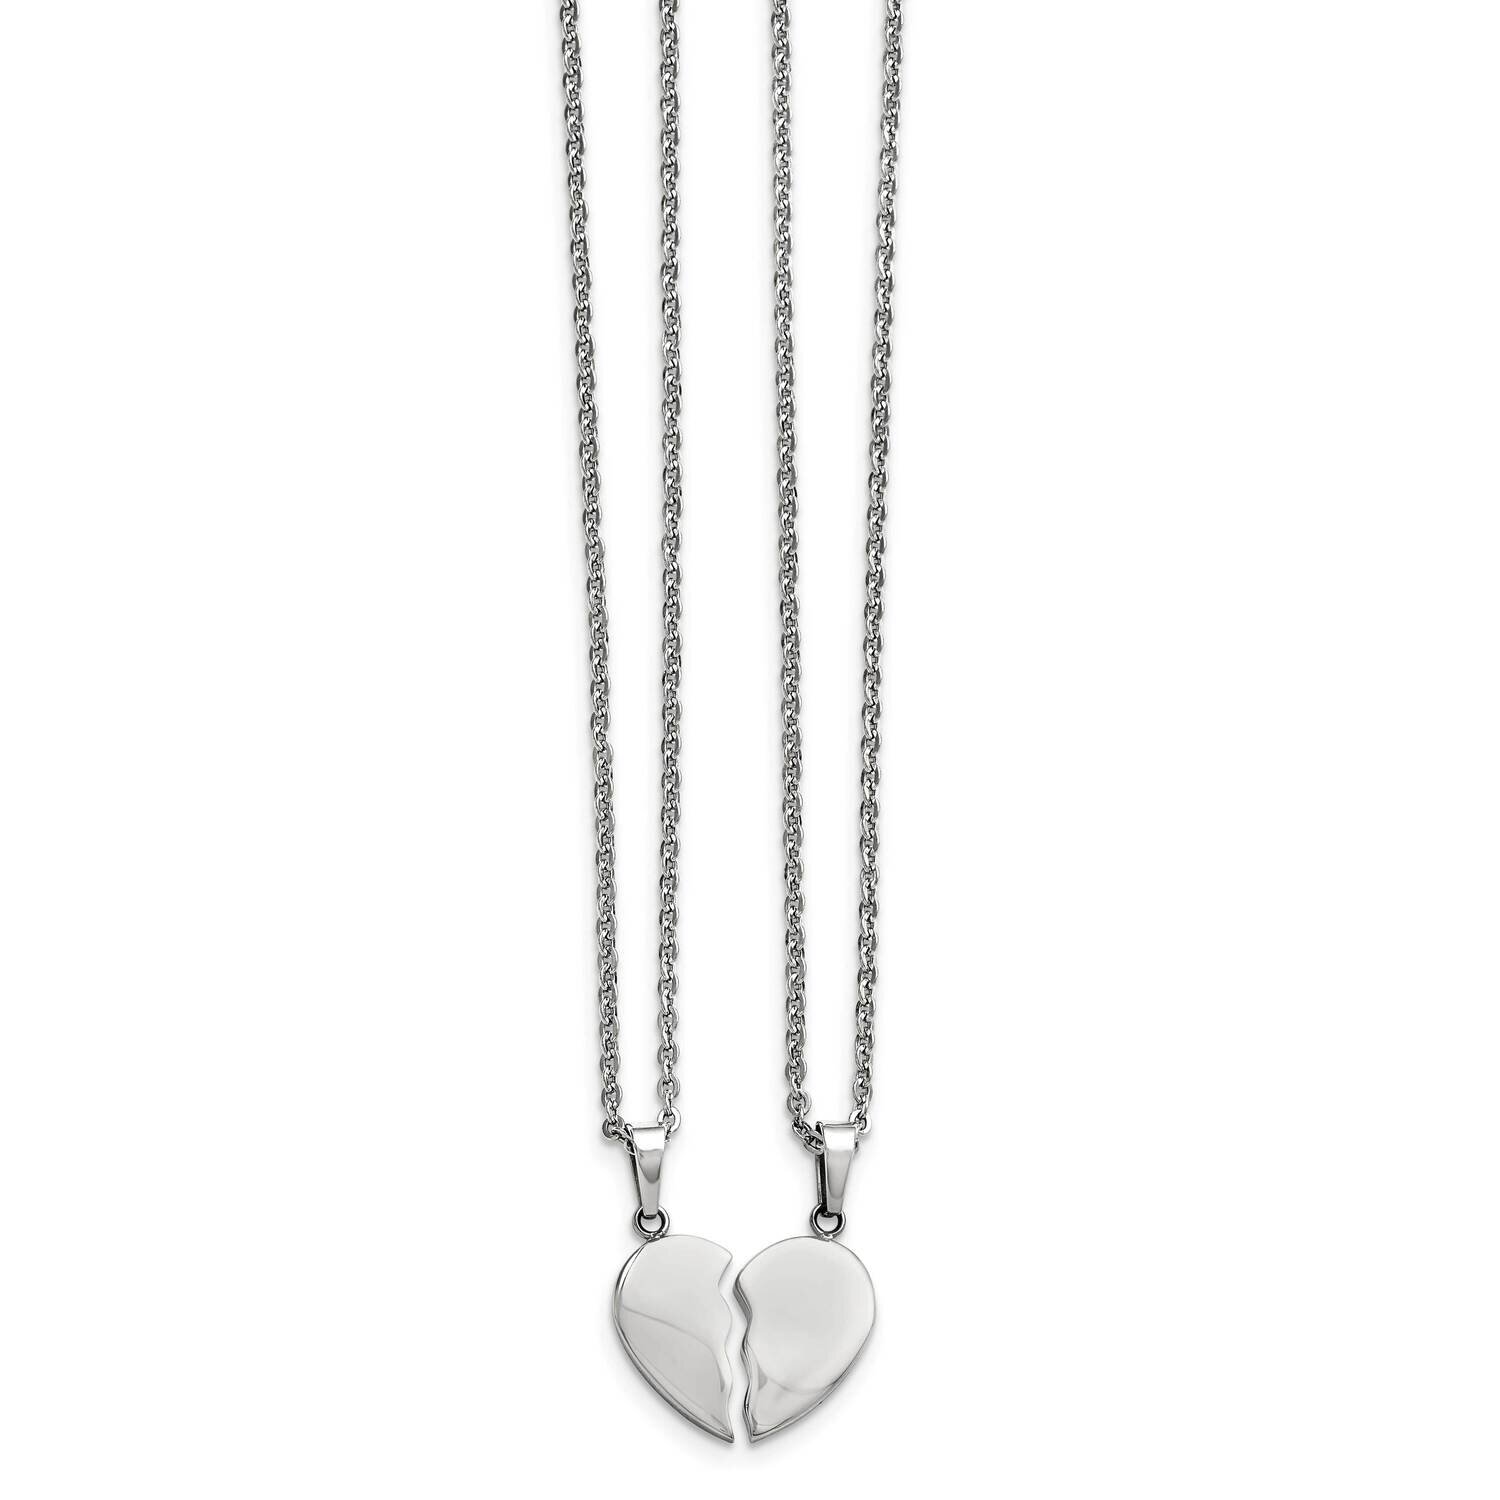 1/2 Heart Necklace Set Stainless Steel Polished SRSET29-20